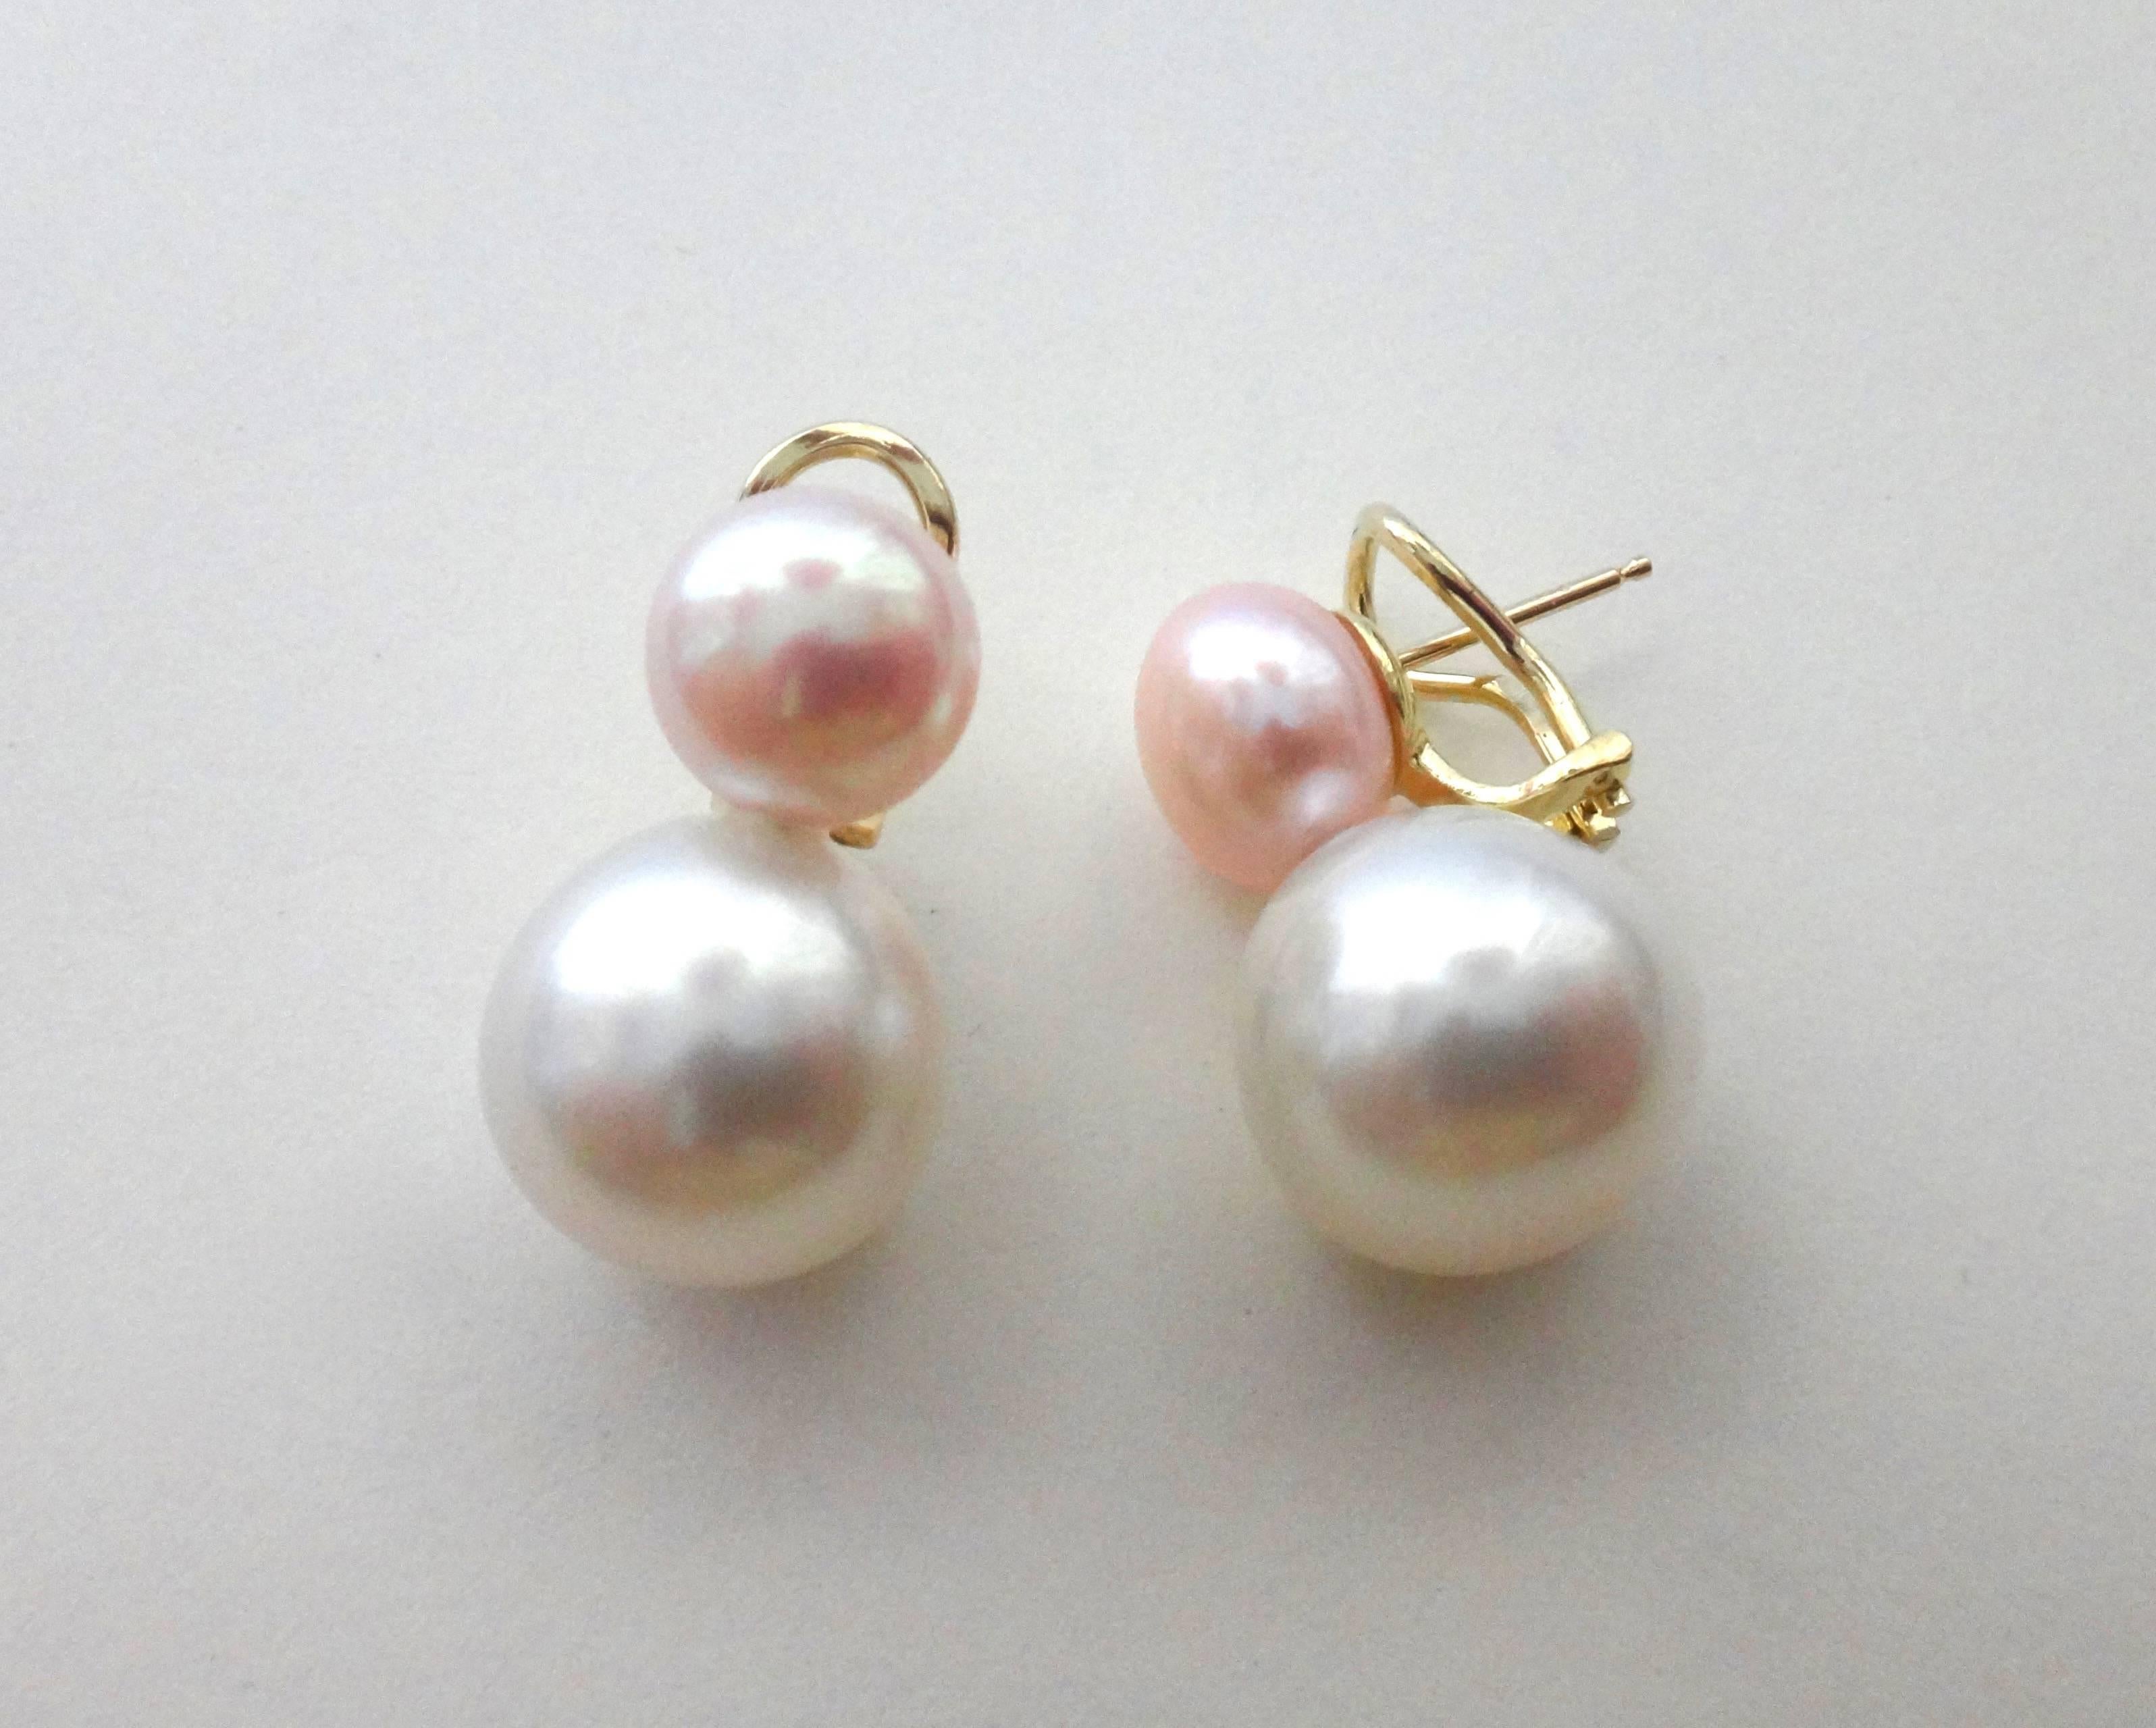 White South Seas and pink cultured pearls are paired in these "Due Perla" or two pearl earrings.  The pearls are statement quality, blemish free and possess great luster.  The earrings come with 18k yellow gold posts with omega clip backs